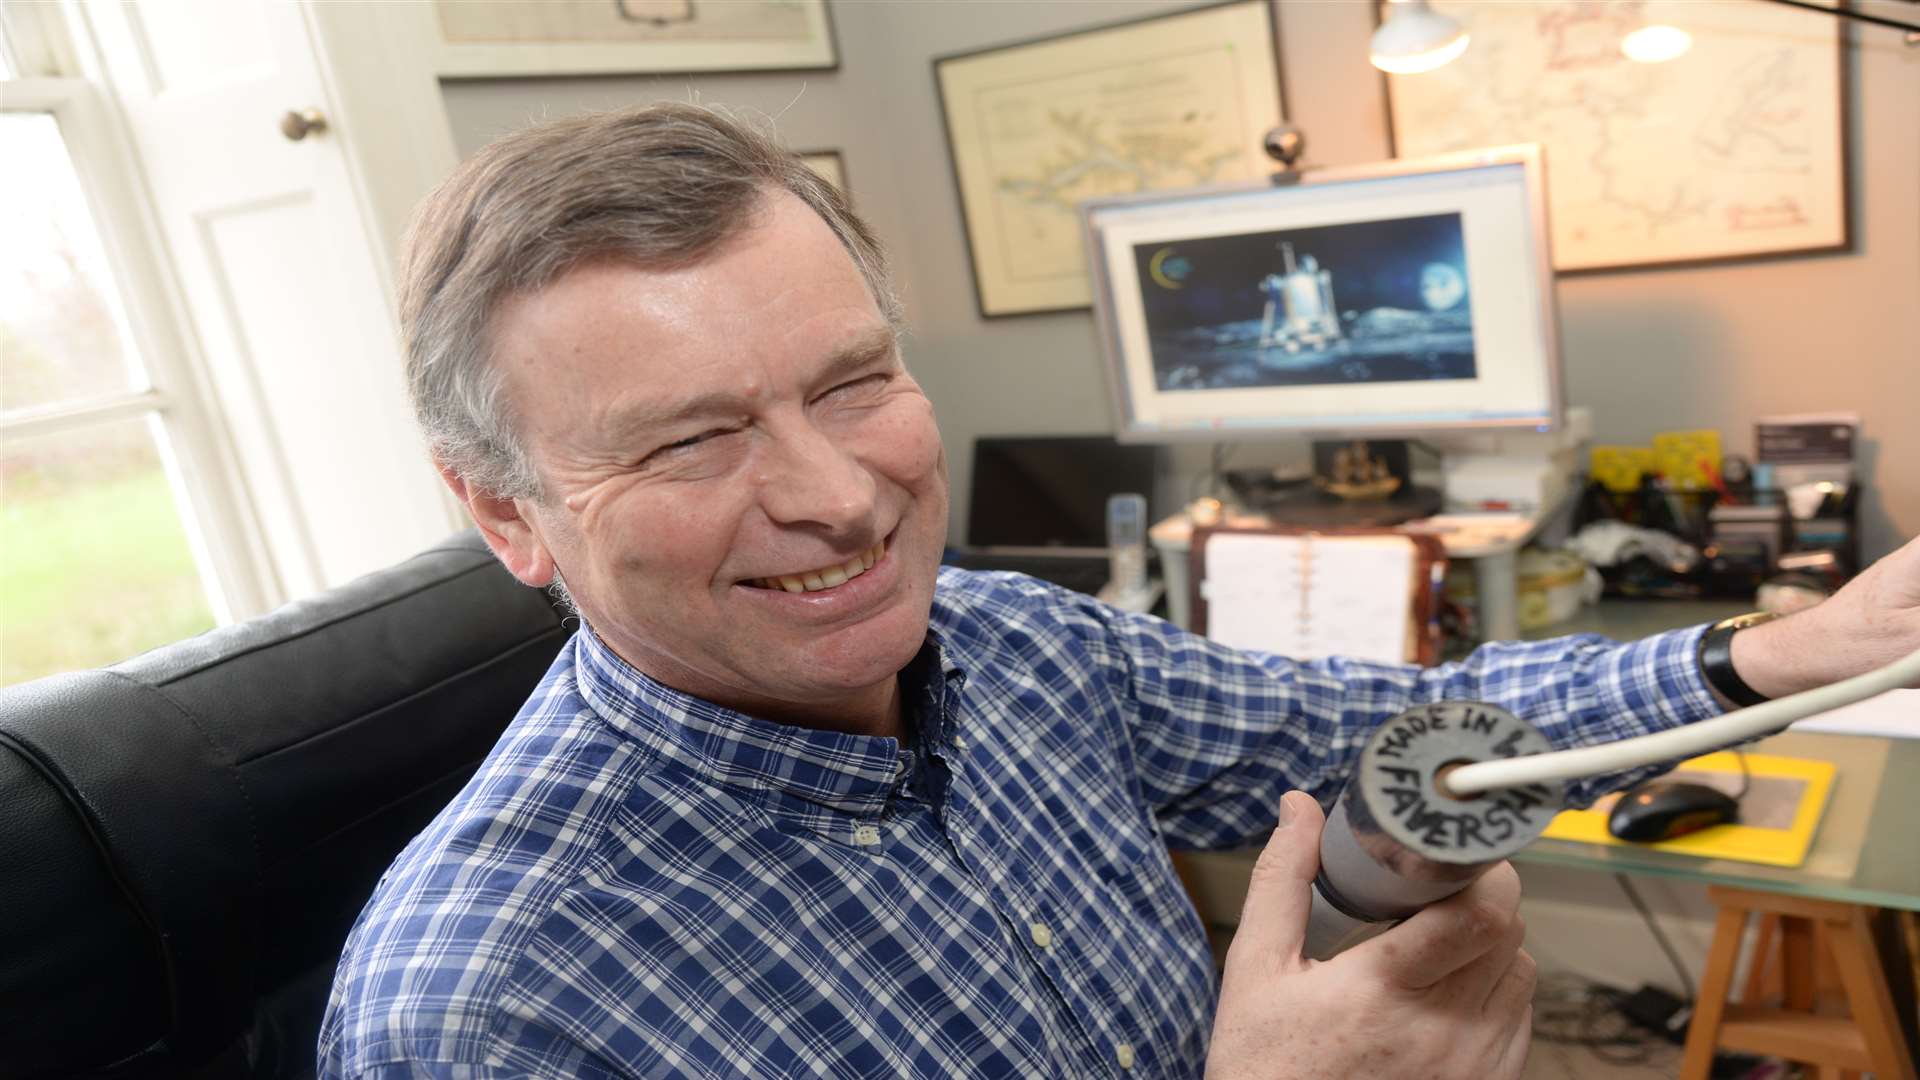 David Iron, who is managing the Lunar Mission One project to land a robot on the moon